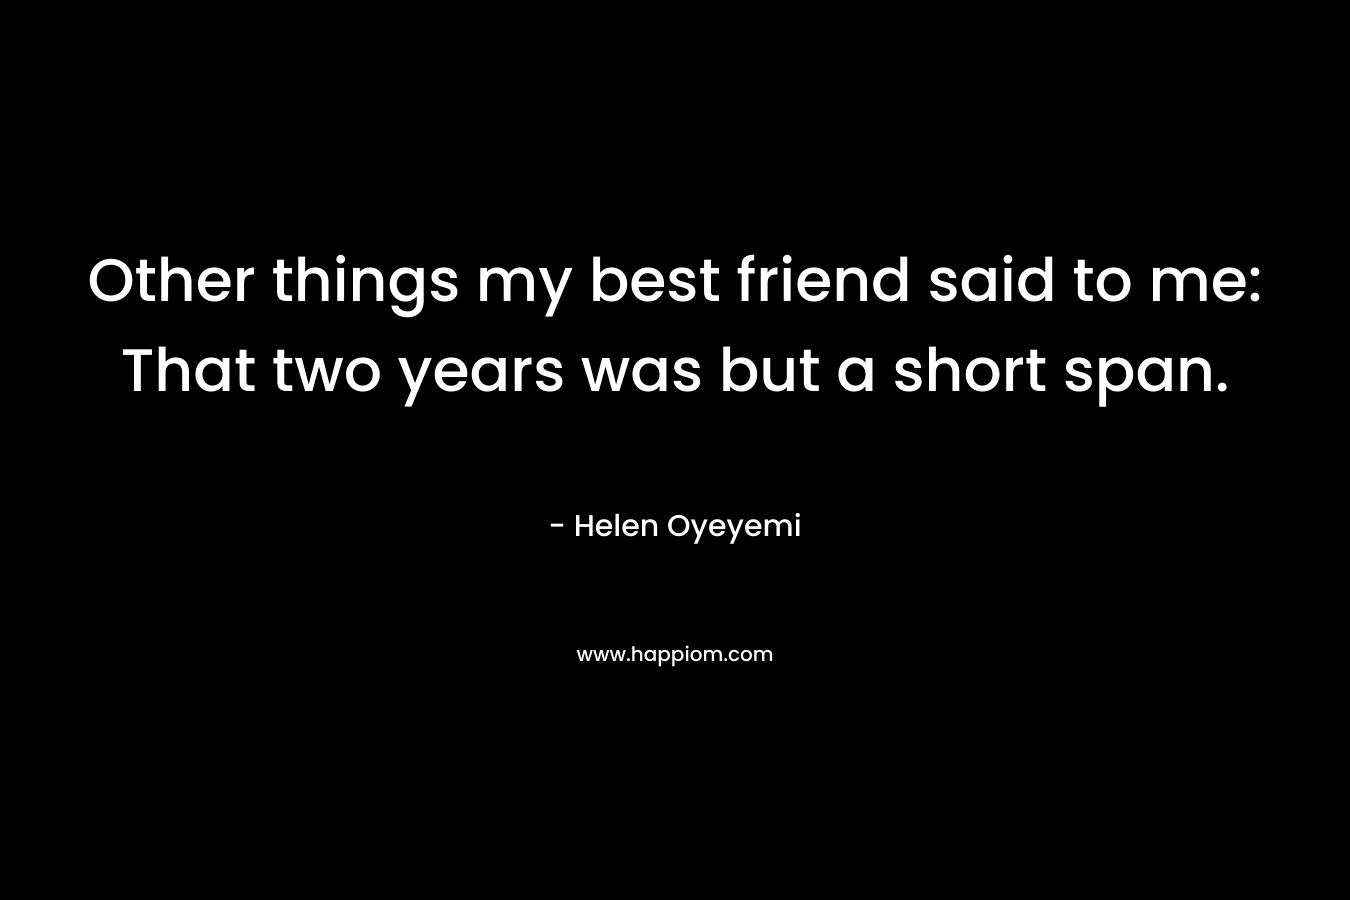 Other things my best friend said to me: That two years was but a short span.